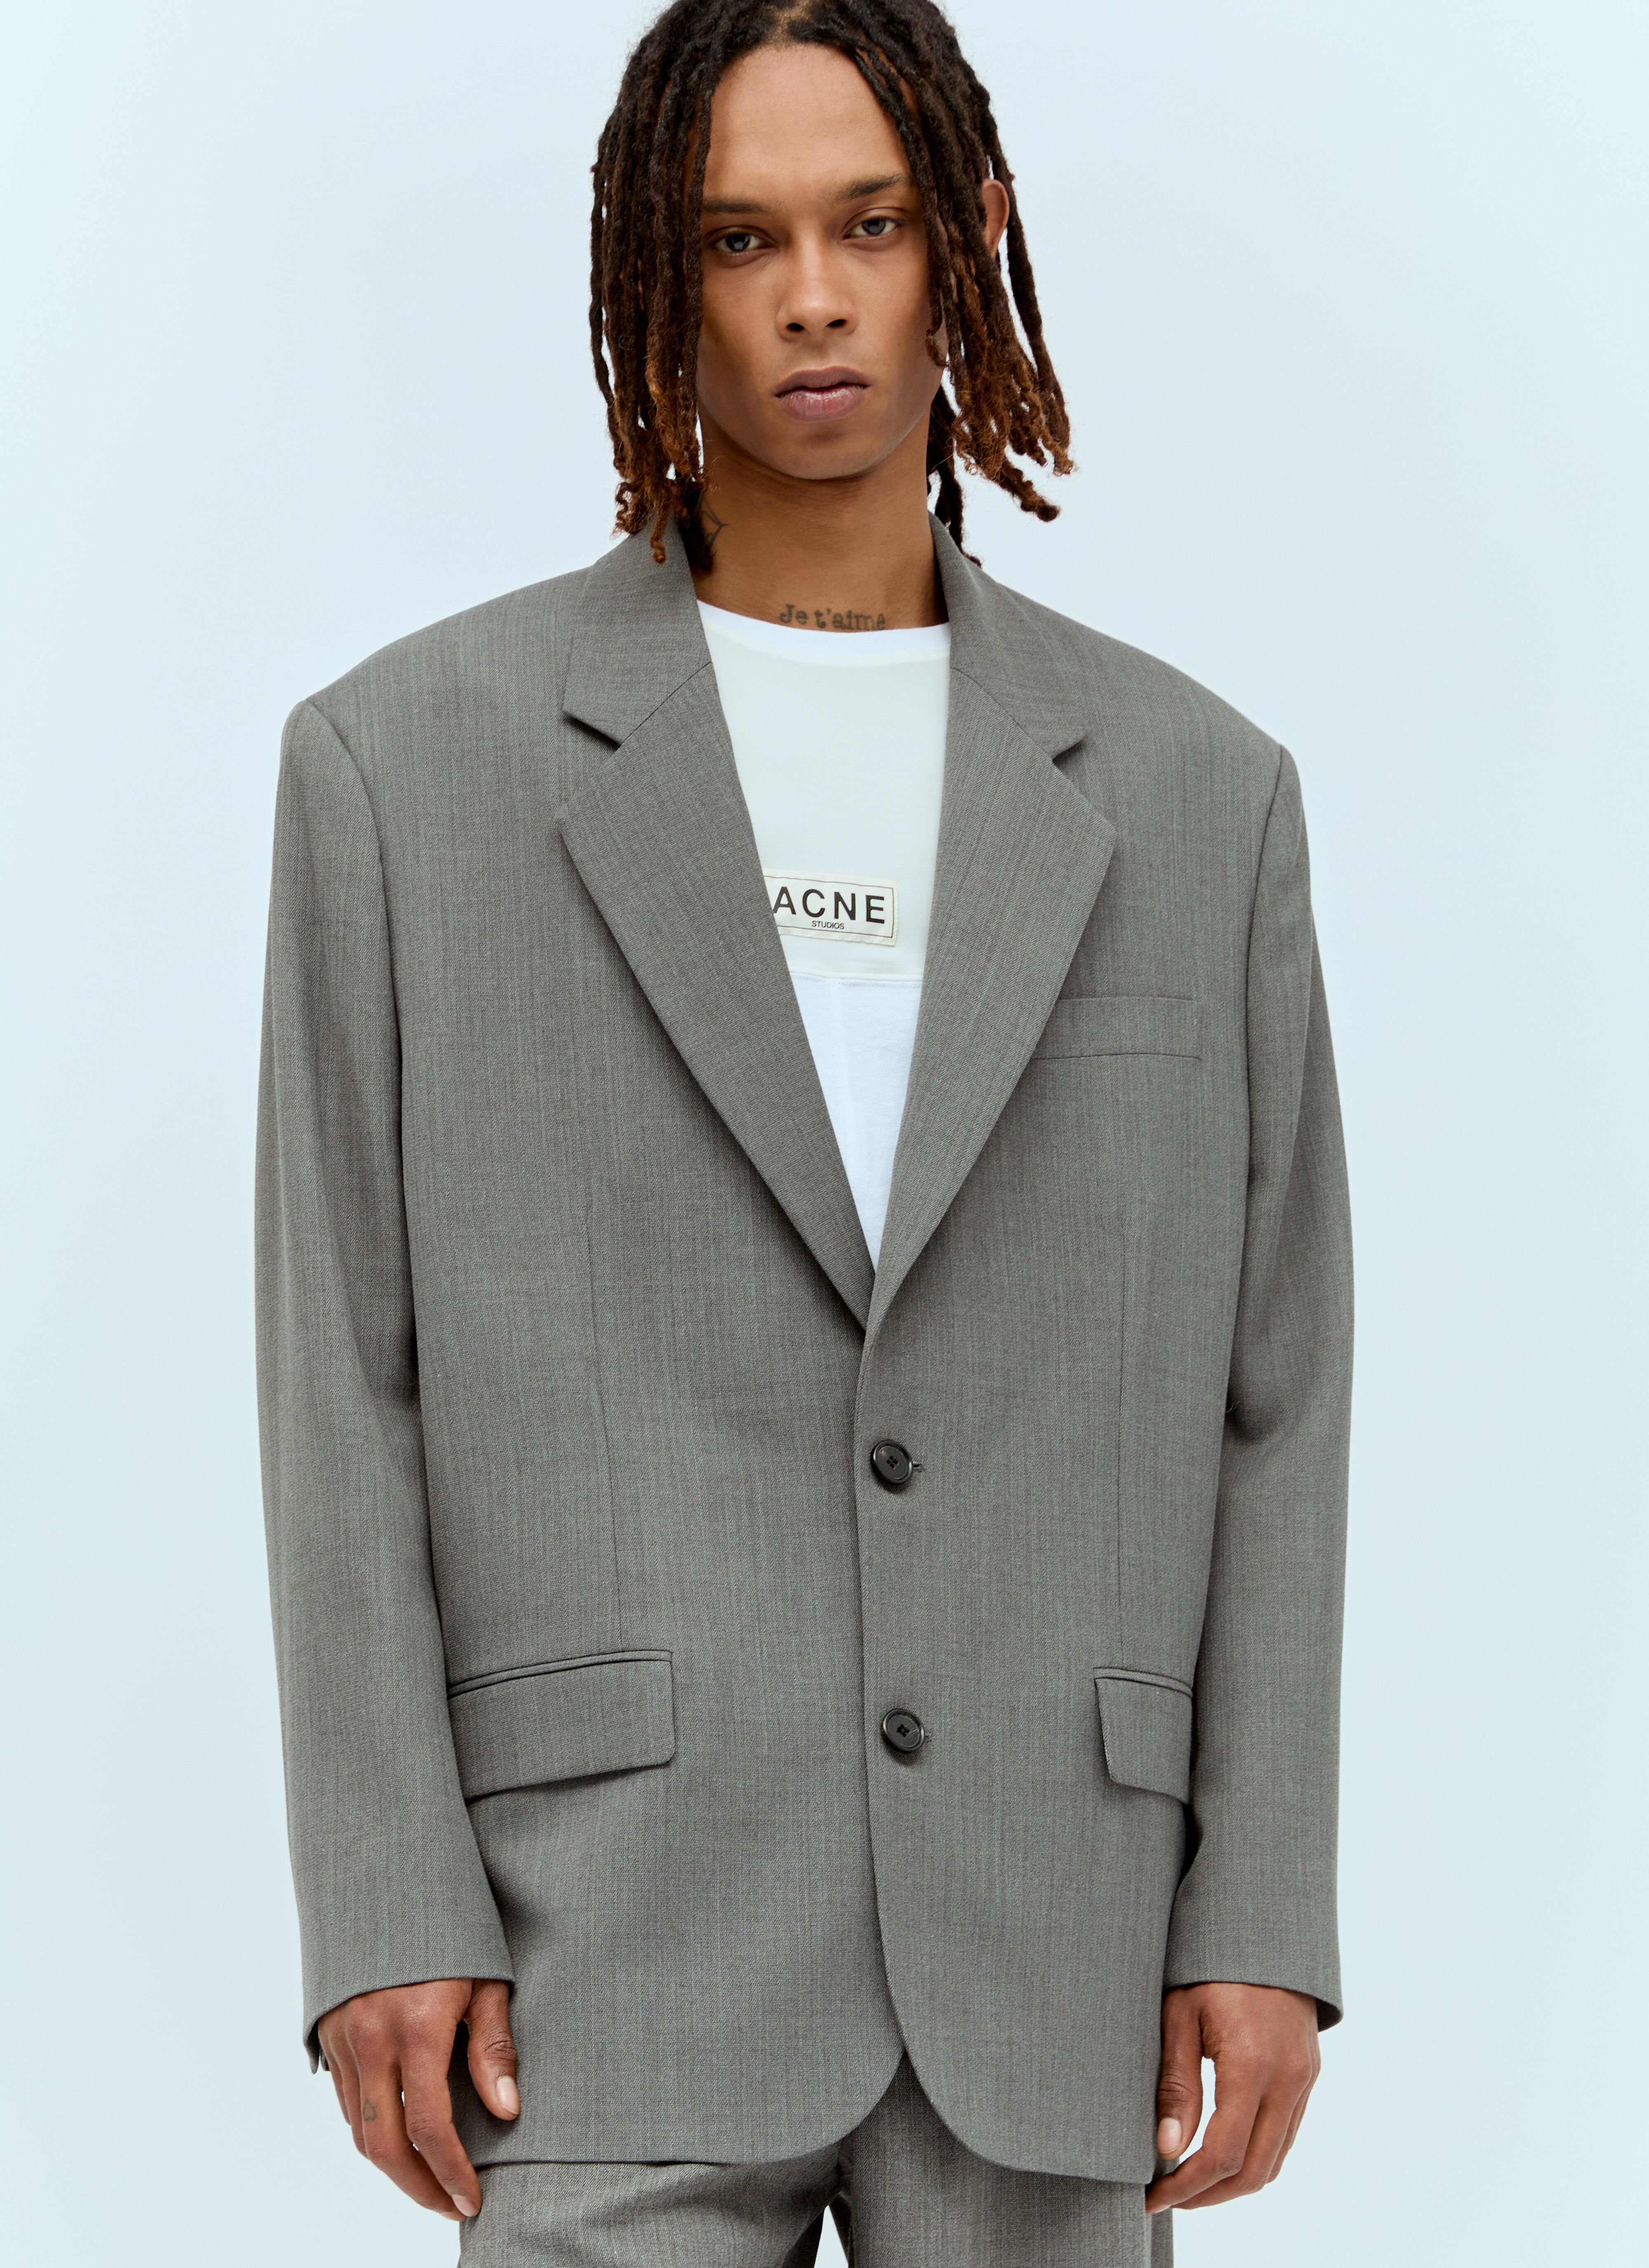 Acne Studios Relaxed-Fit Suit Blazer Grey acn0357001